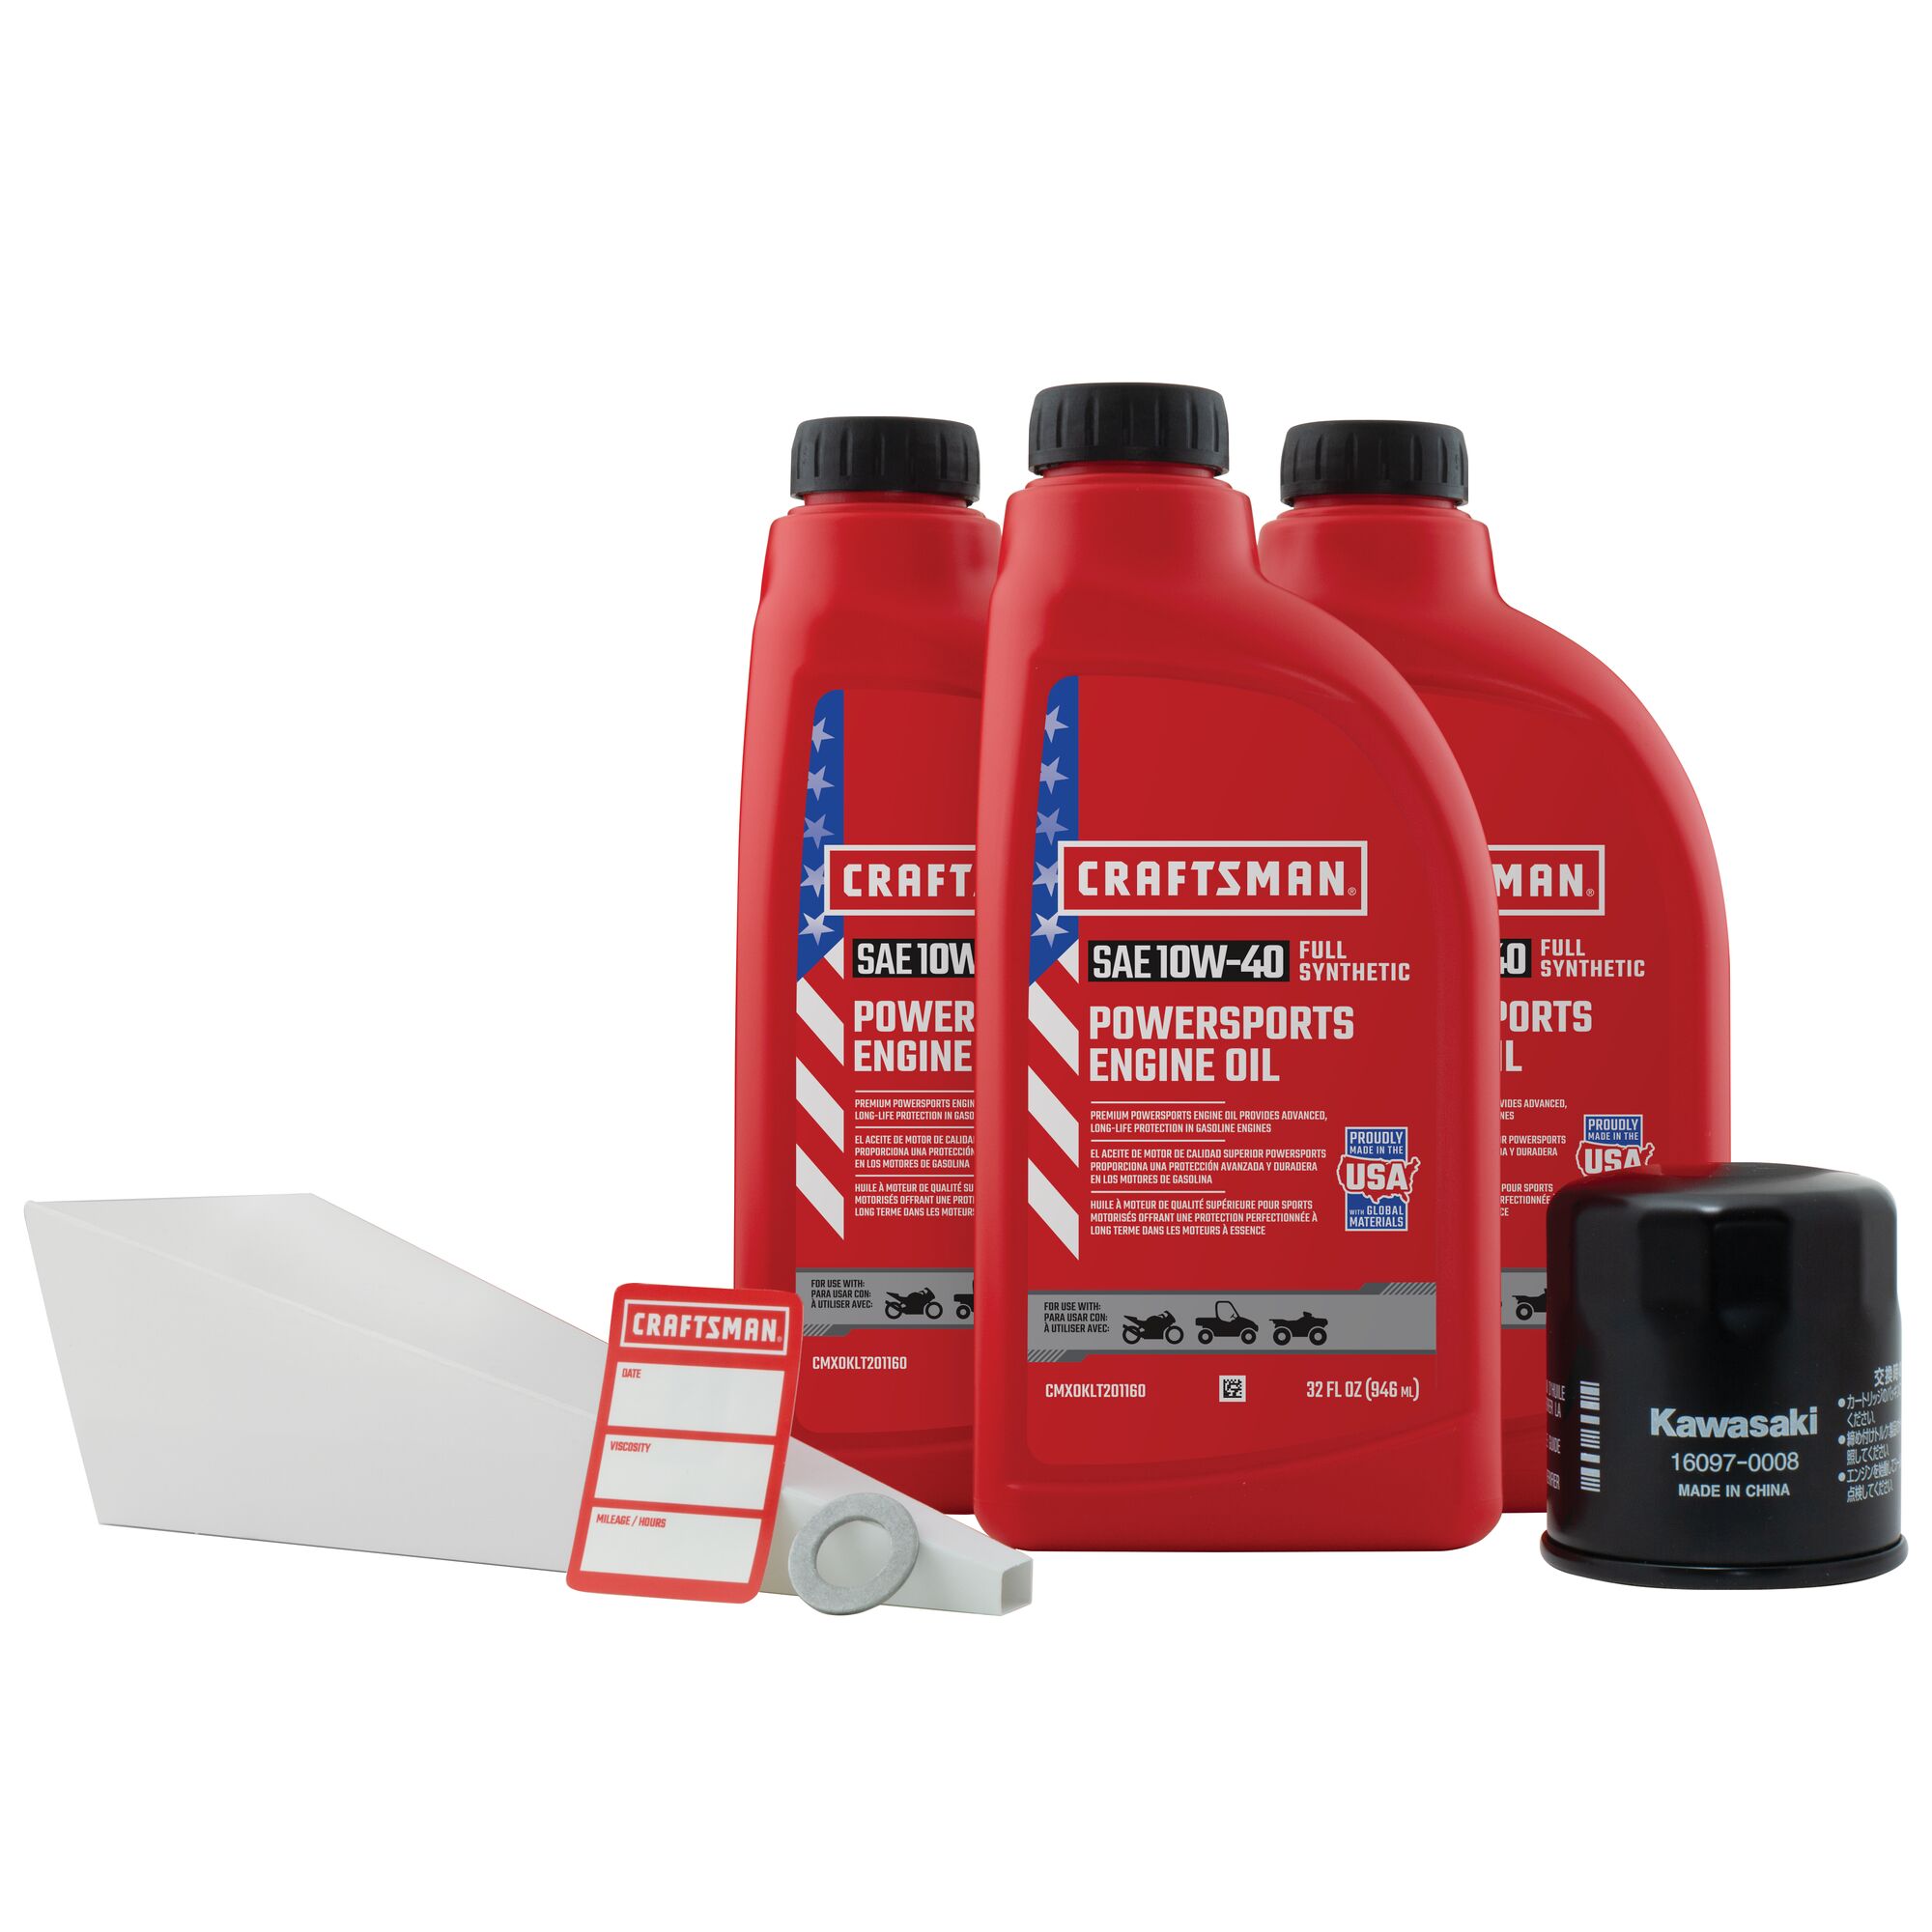 Oil change kit with oil filter, change sticker and oil funnel